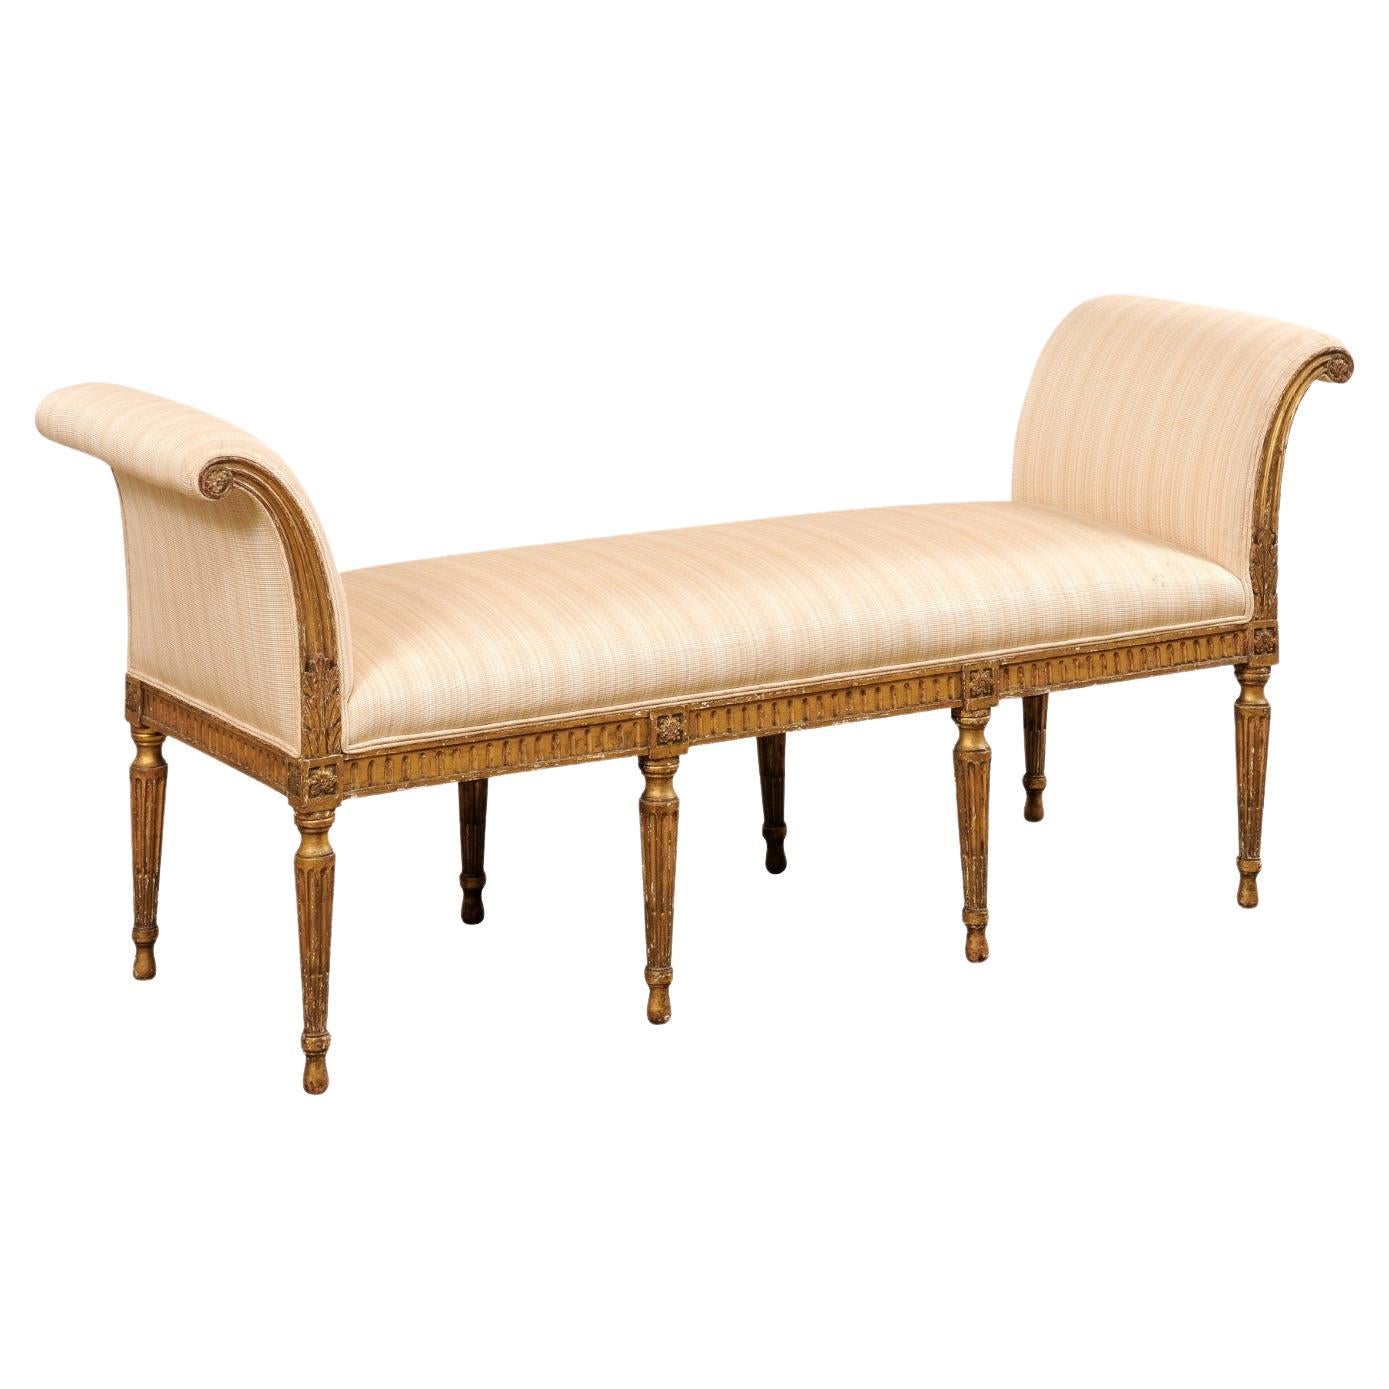 French Louis XVI Style Scroll Arm Window Bench, Late 19th Century For Sale